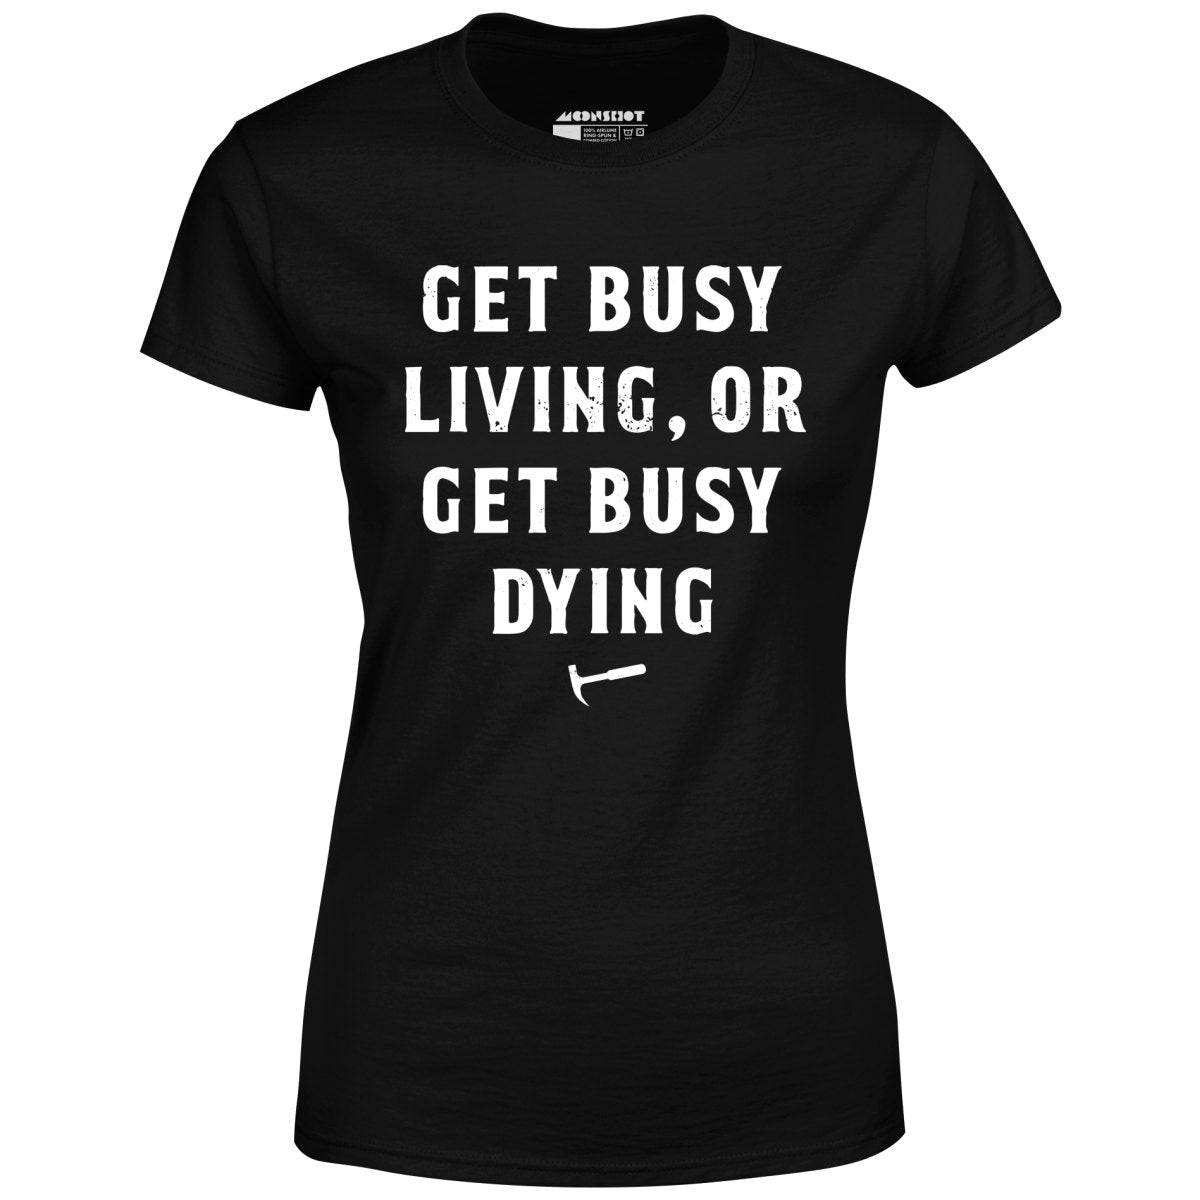 Get Busy Living or Get Busy Dying - Women's T-Shirt